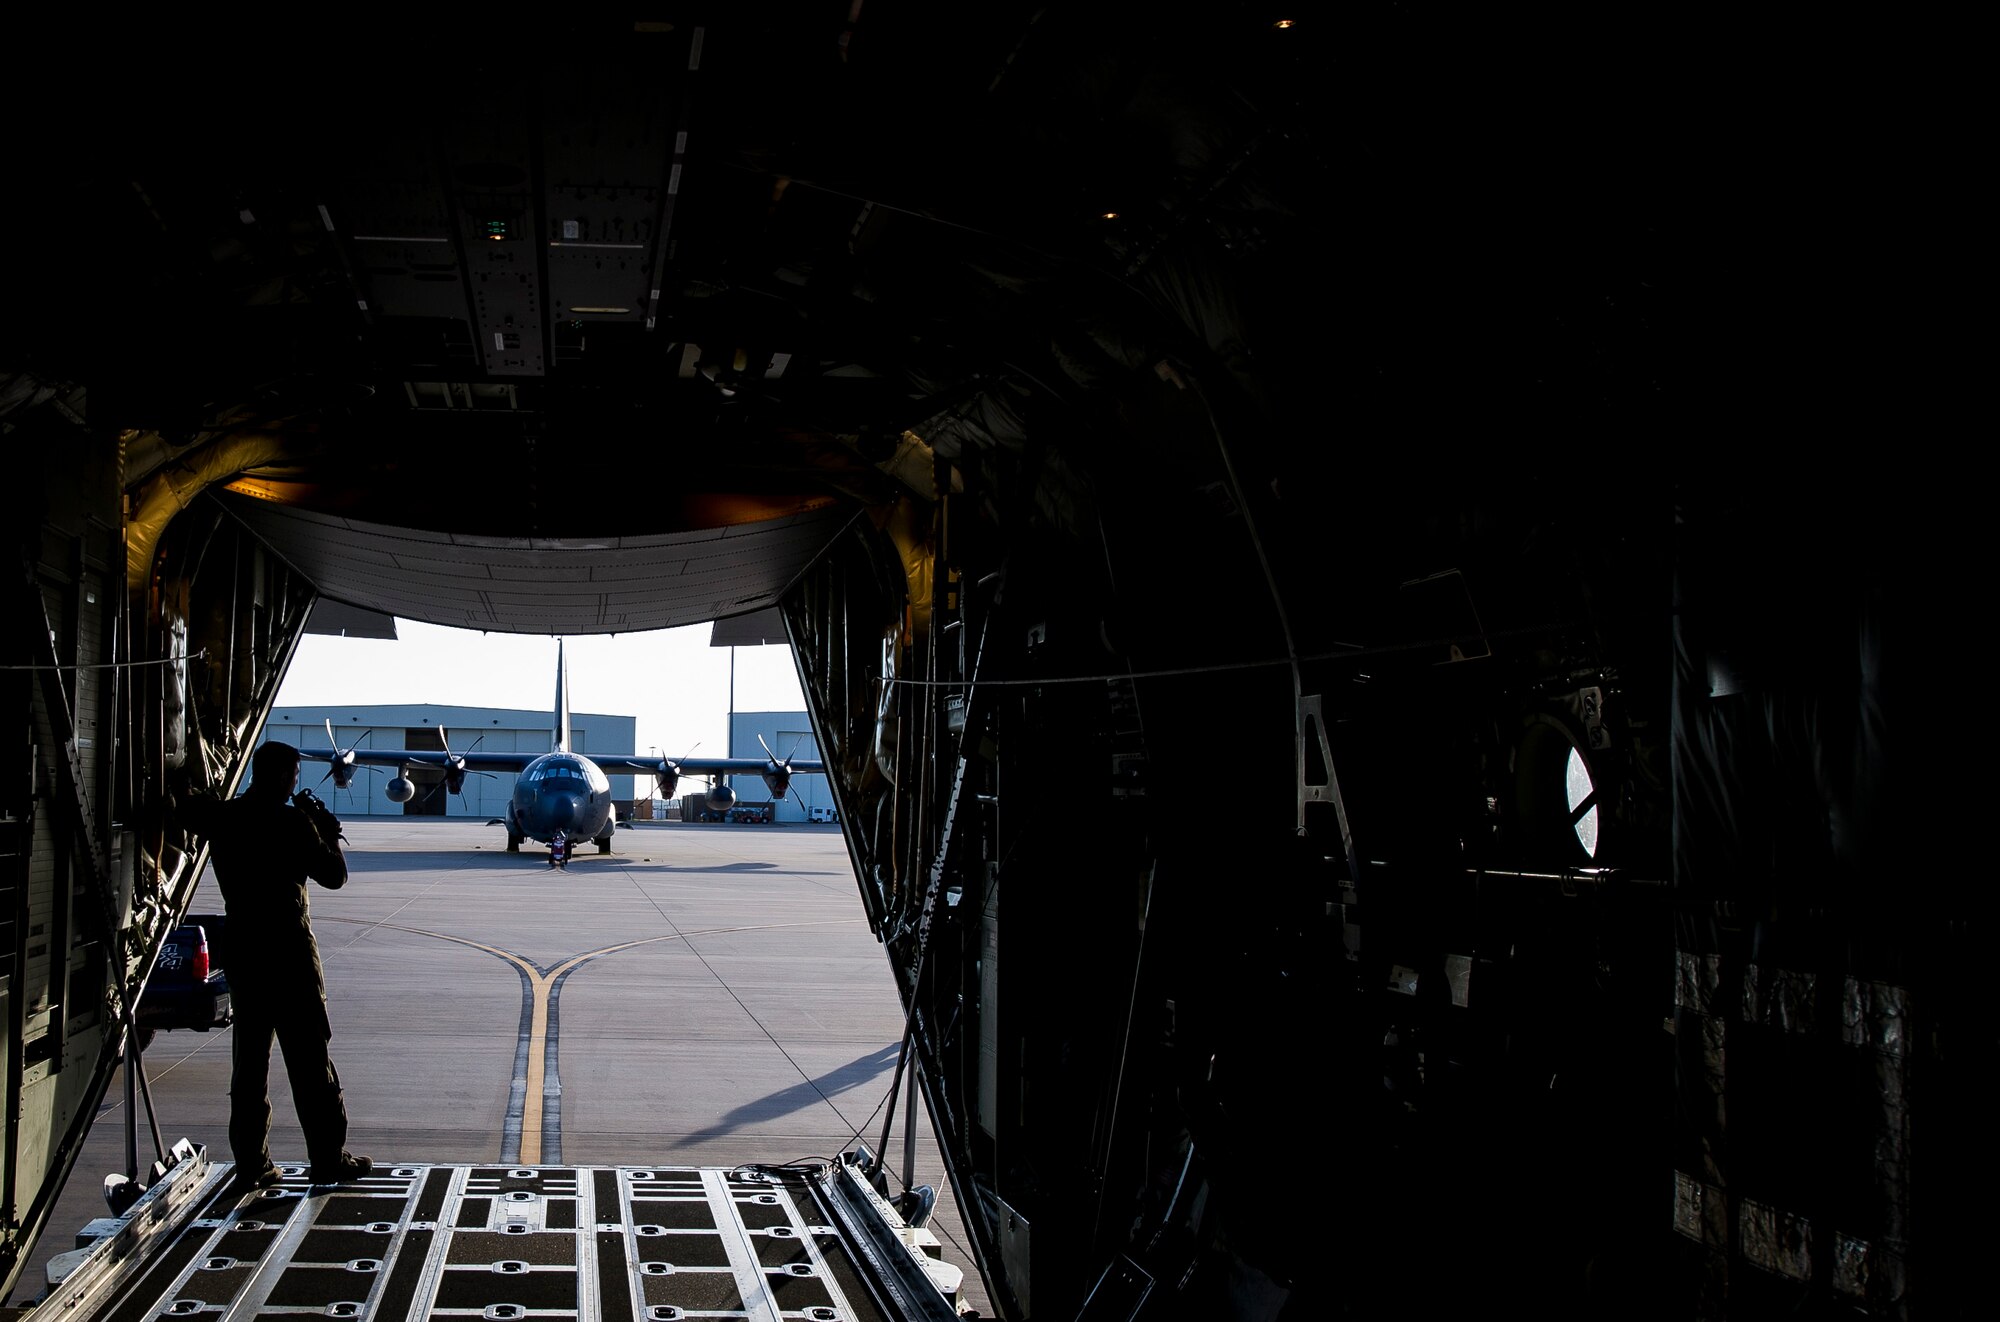 An Airman from the 9th Special Operations Squadron peers out from the back of an aircraft used for a ‘fini flight’ early in the morning at Cannon Air Force Base, New Mexico, Jun. 9, 2017. Dating back to World War II, the U.S. military has celebrated pilots’ and other experienced officers’ final flights either at their current unit or their career. Pilots use these celebrations as another opportunity to help train accompanying Airmen on their roles aboard the aircraft to ensure mission readiness. (U.S. Air Force photo by Senior Airman Lane T. Plummer)